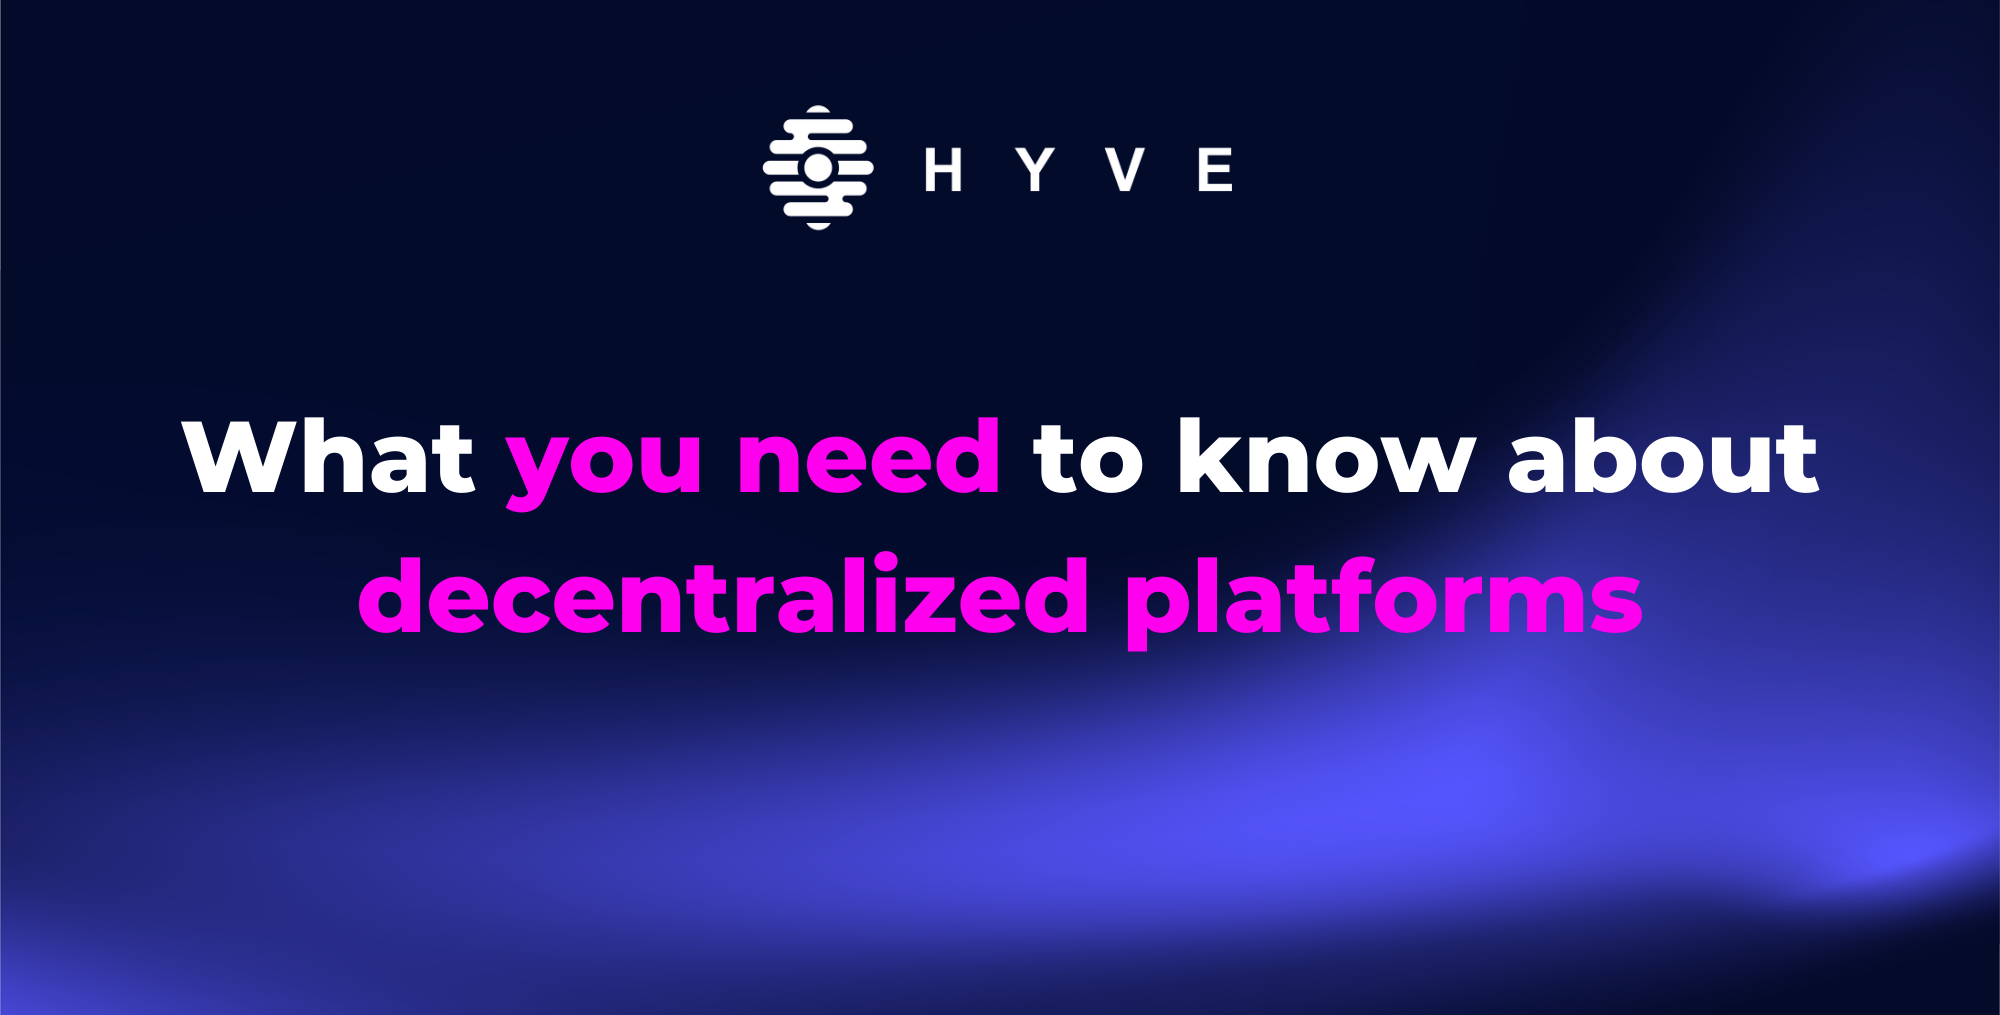 What you need to know about decentralized platforms